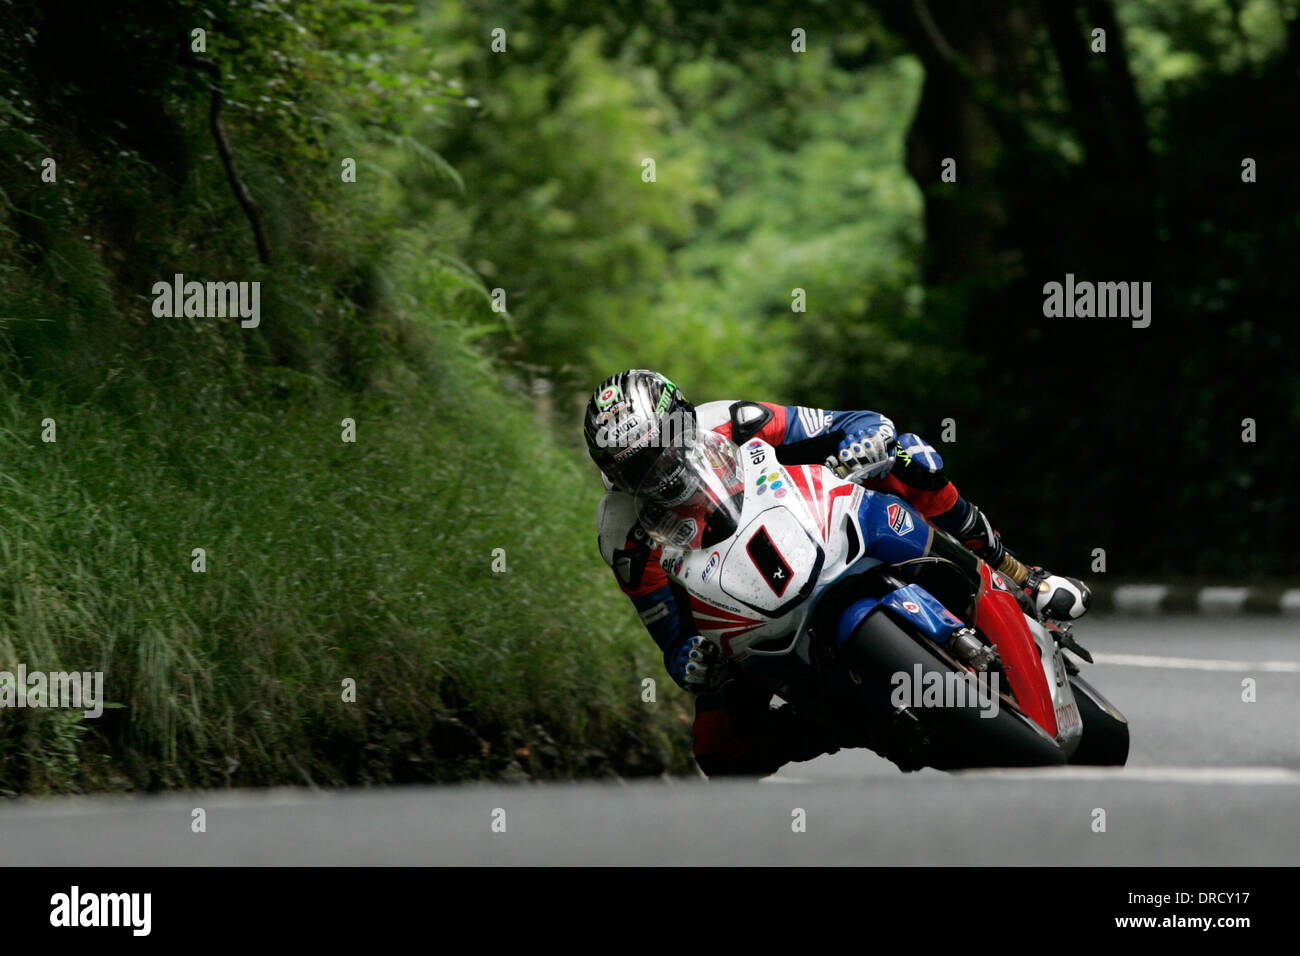 John McGuinness leaving Ramsey Hairpin and approaching the Waterworks during the 2011 Superbike TT race on the Isle of Man. Stock Photo